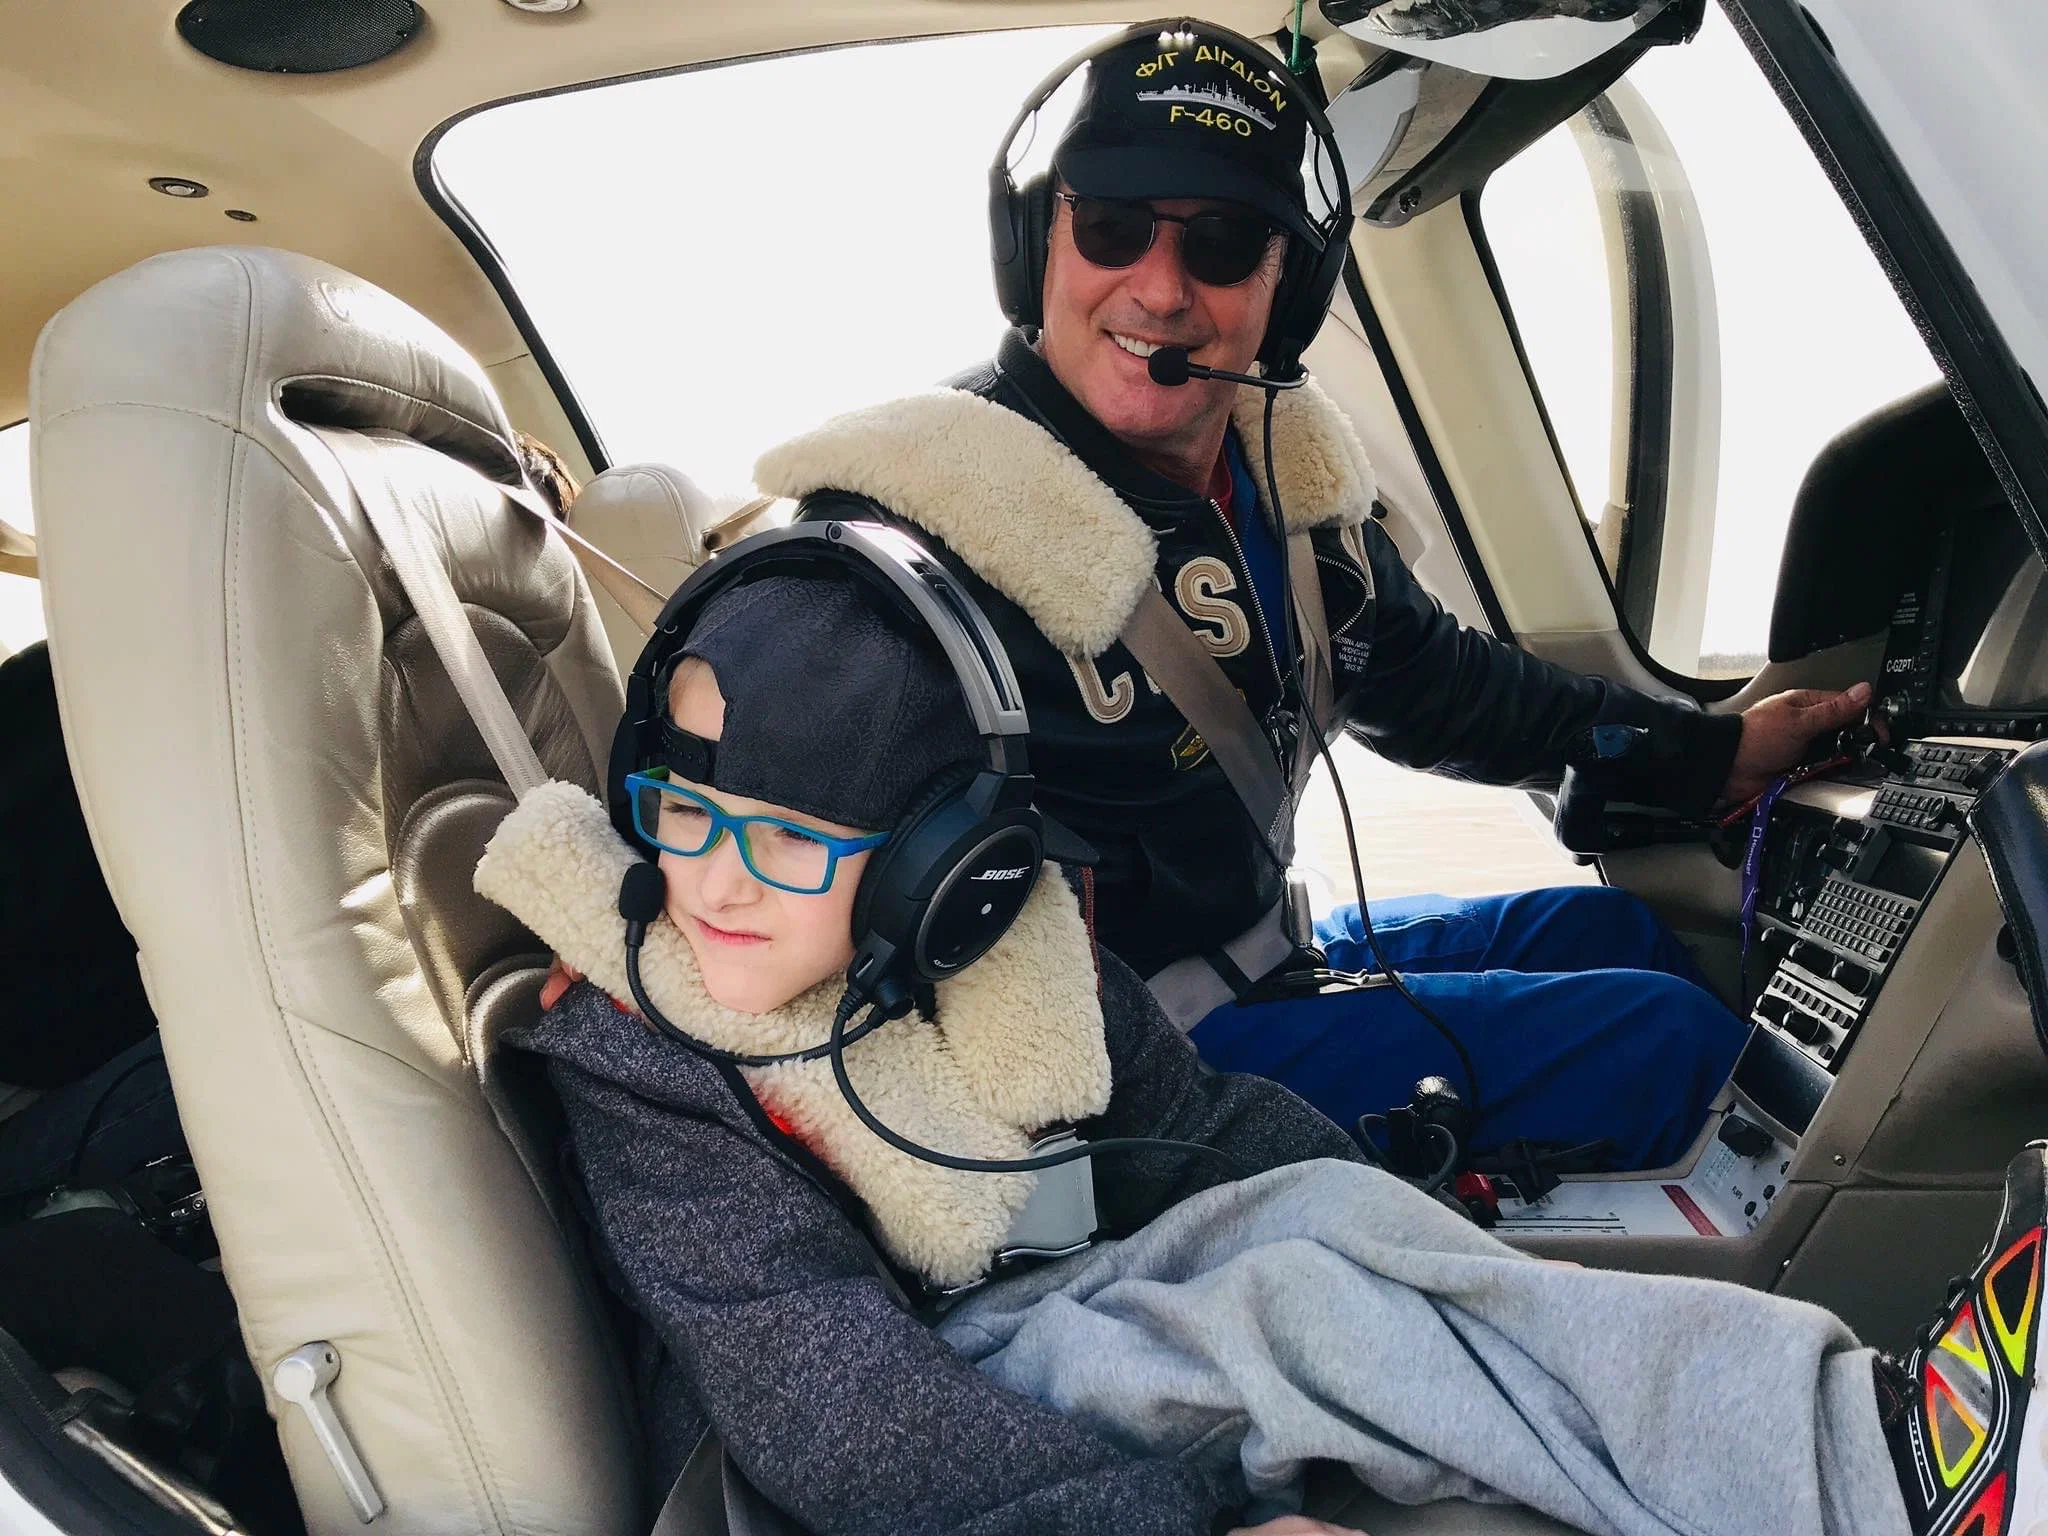 Meet the Greek pilot who lifts the spirits of children with disabilities